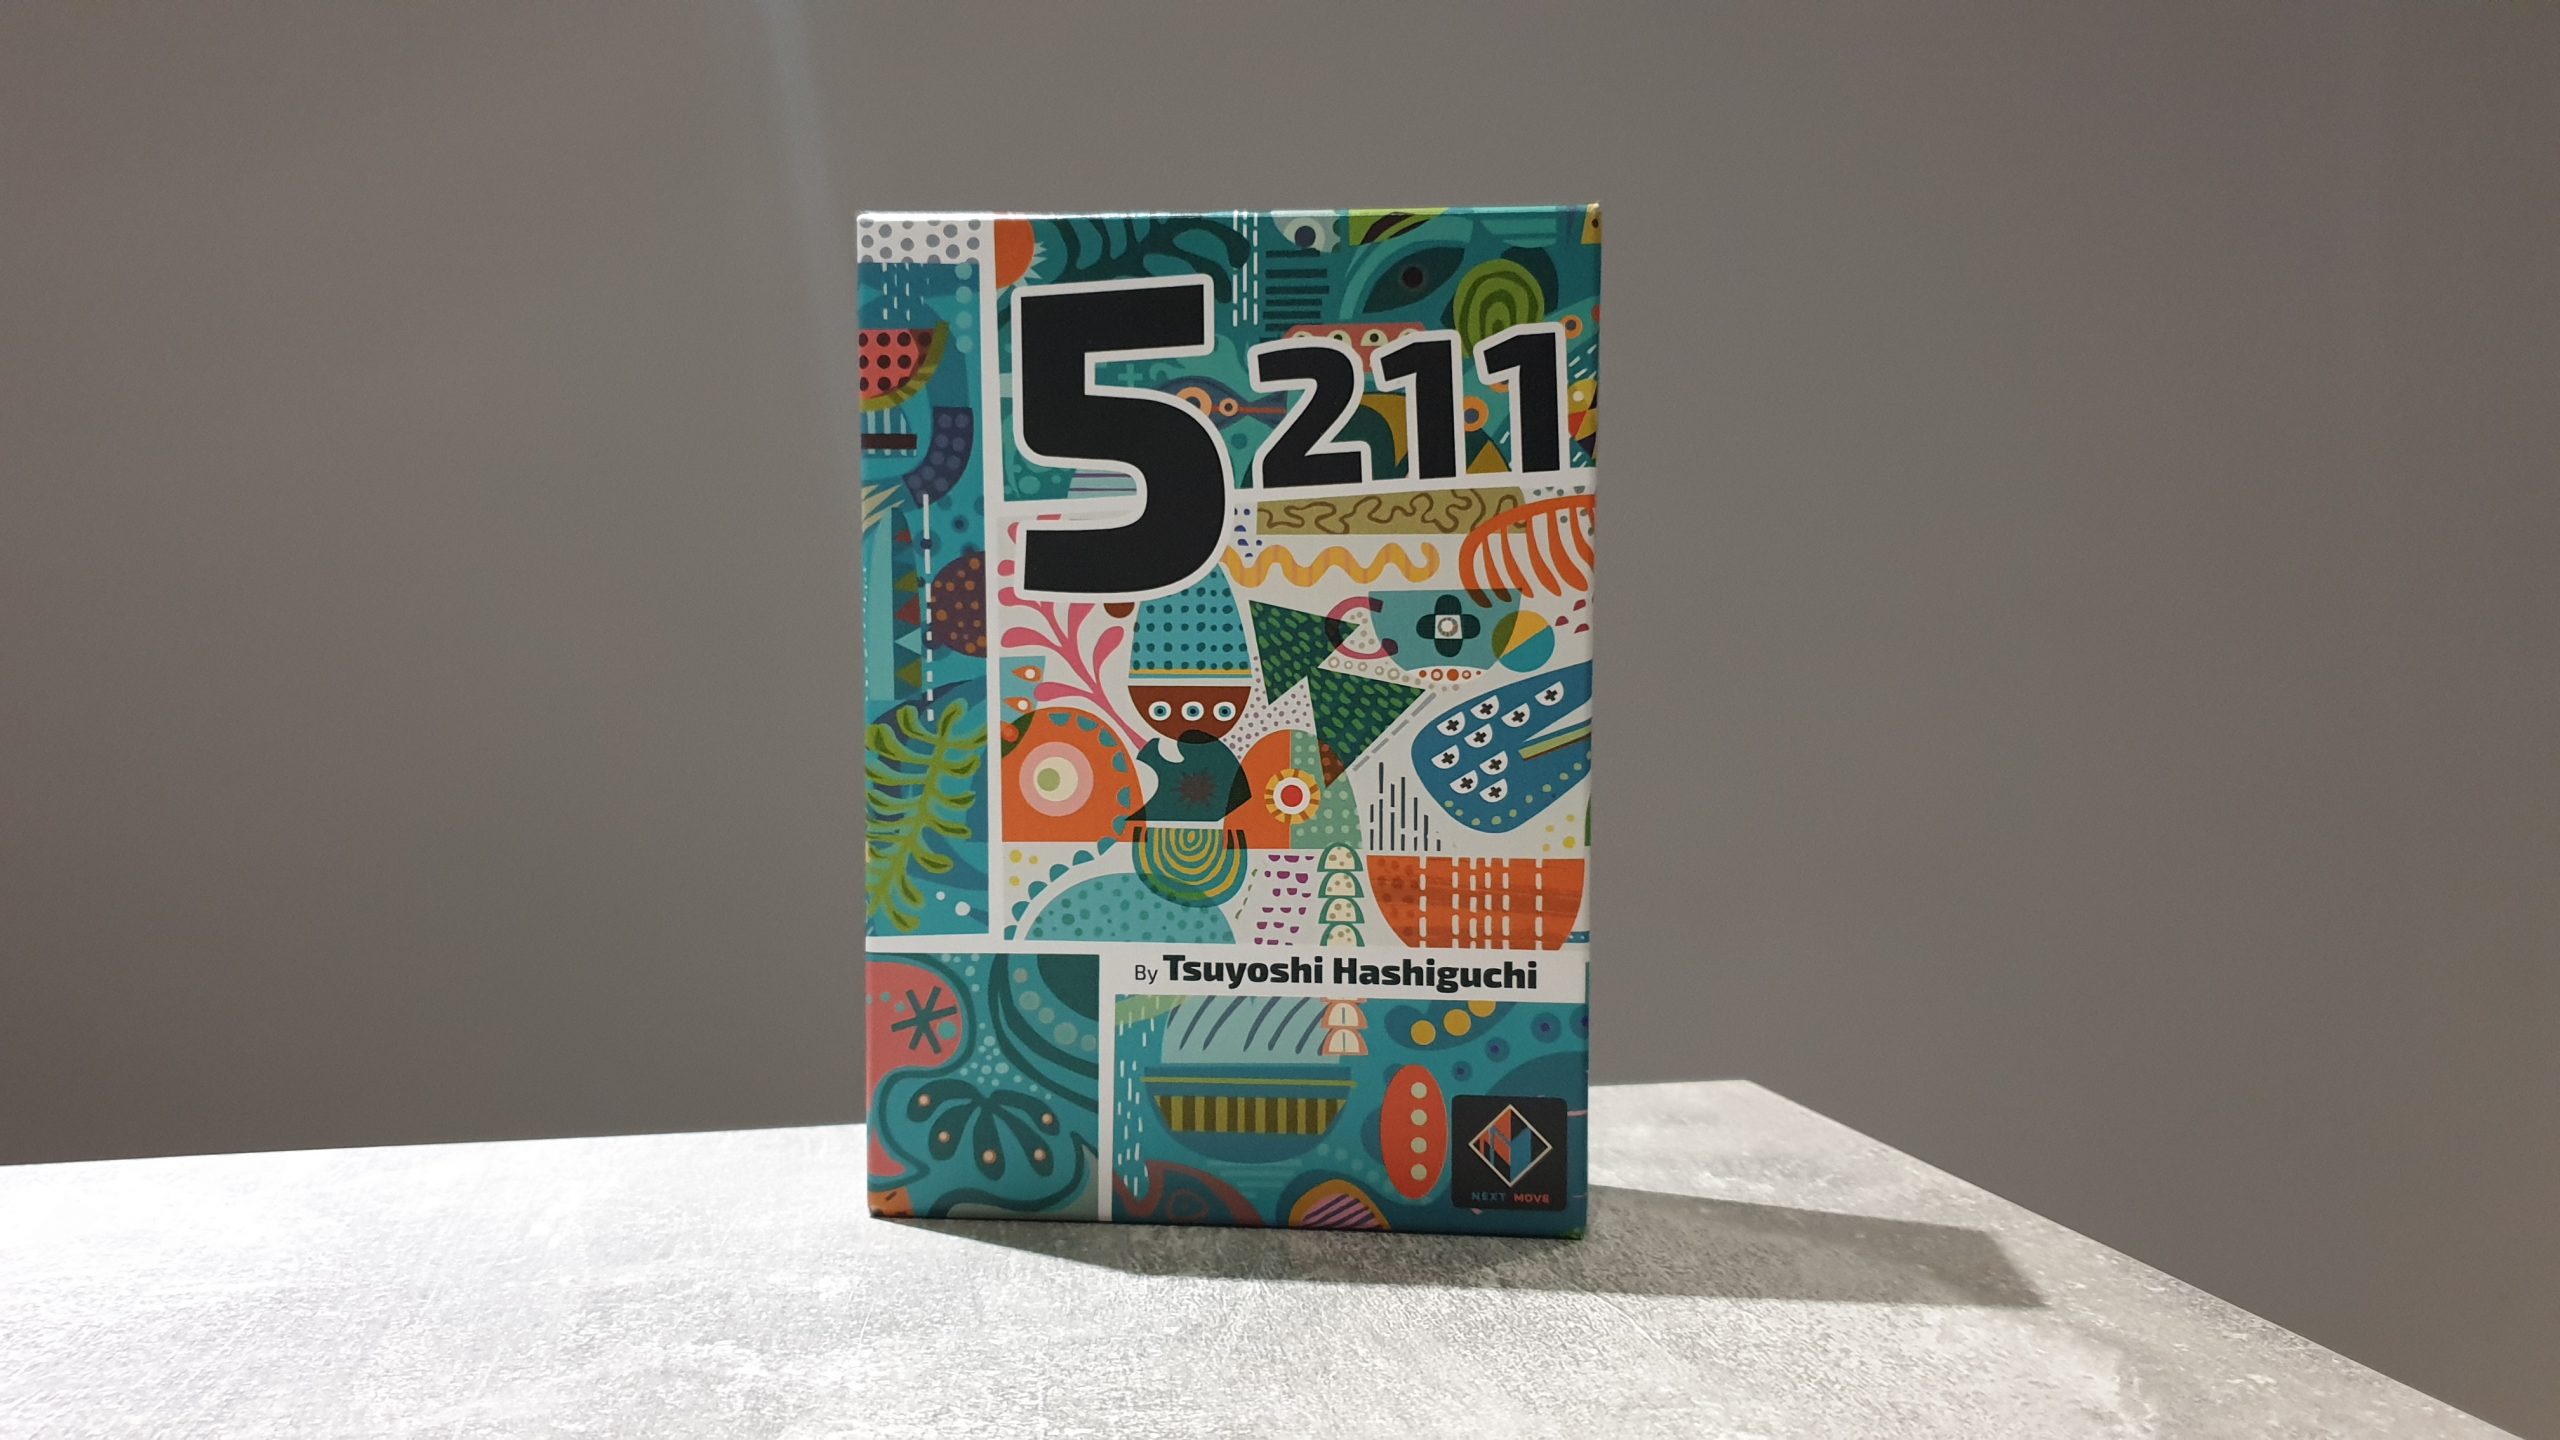 5211 Review – Another Hit From Next Move?